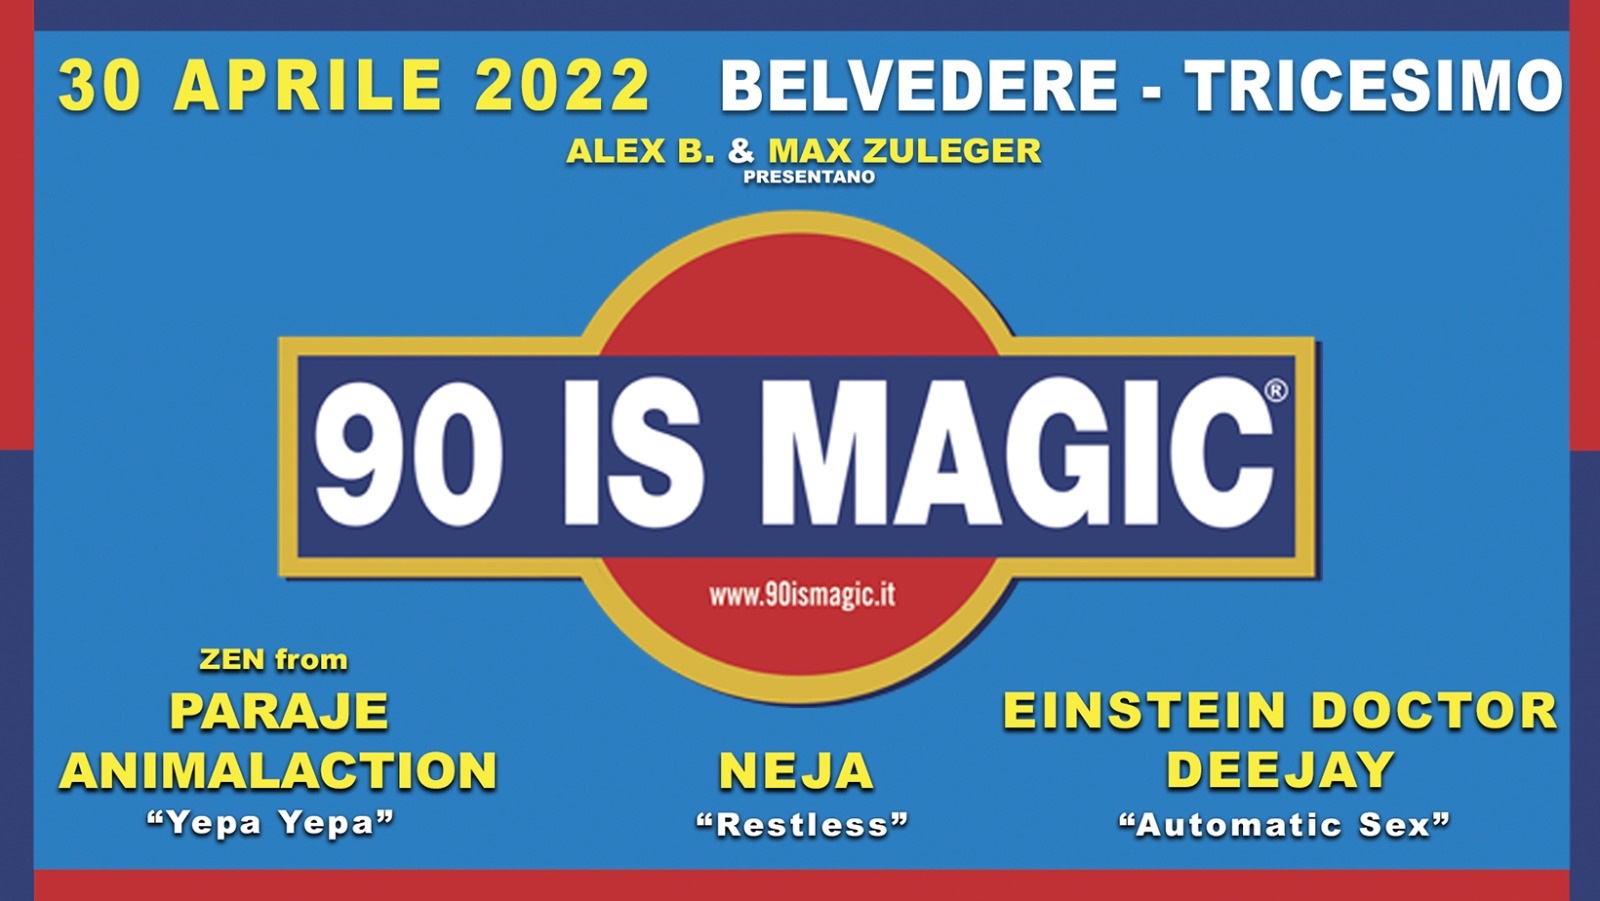 90 is Magic a tricesimo